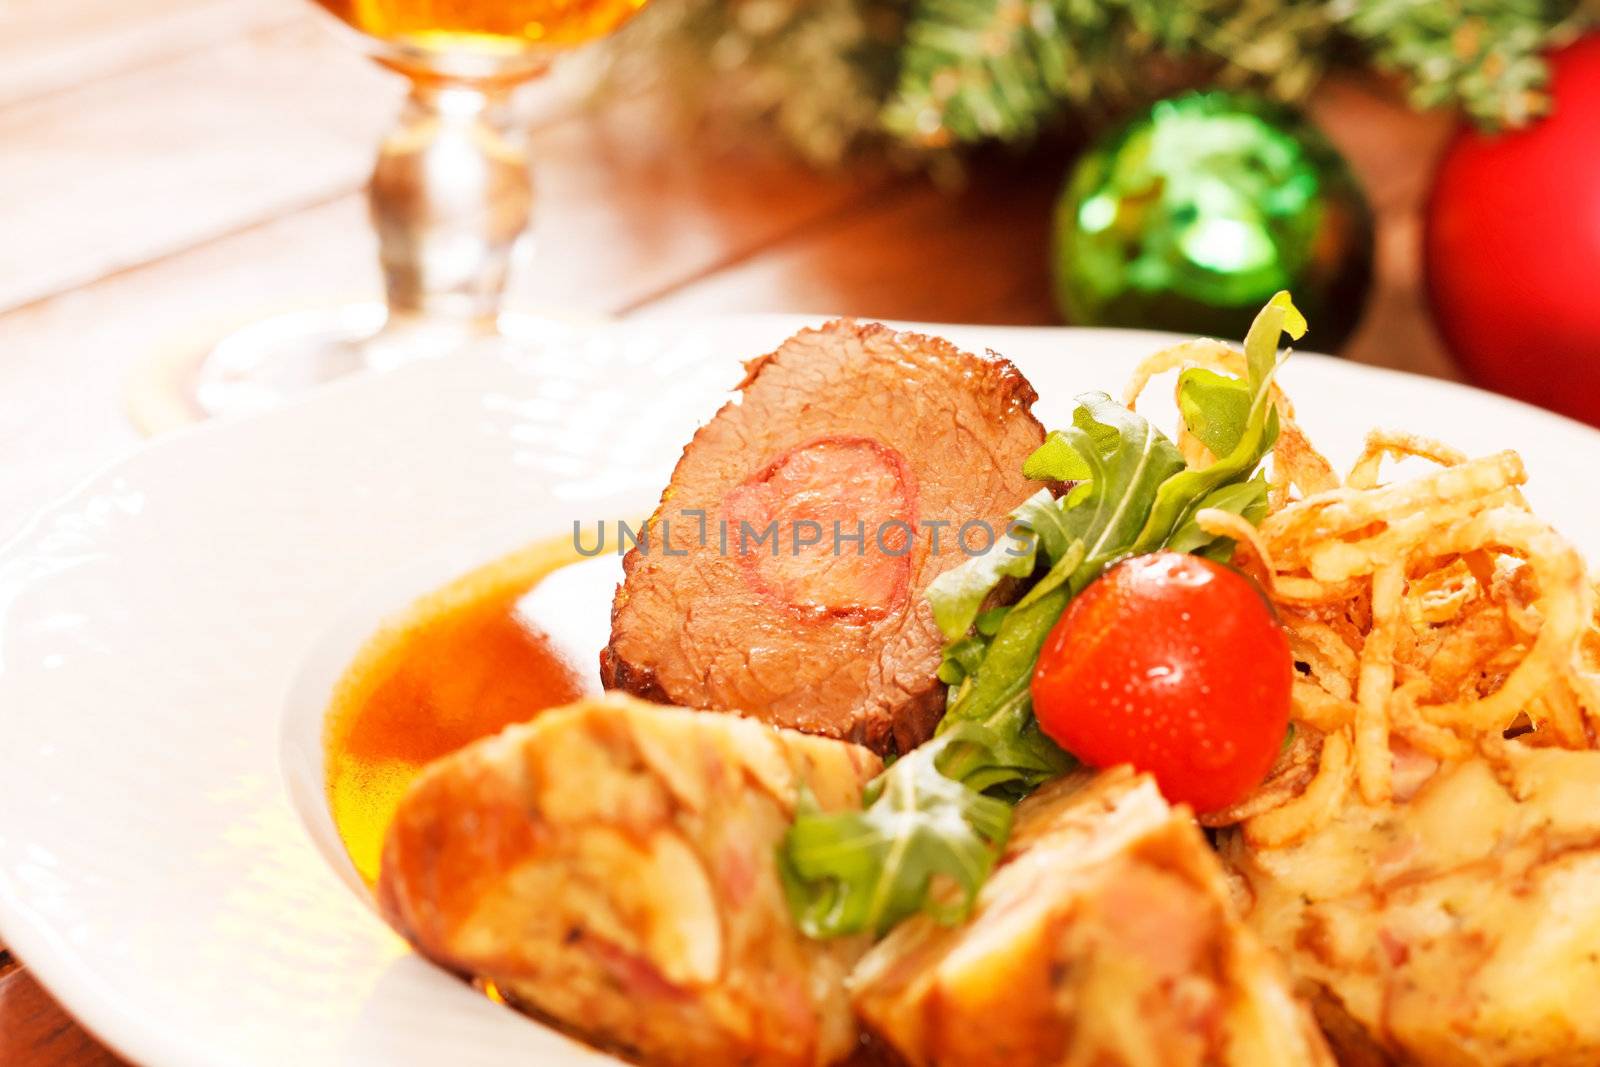 roasted meat on Christmas table by shebeko